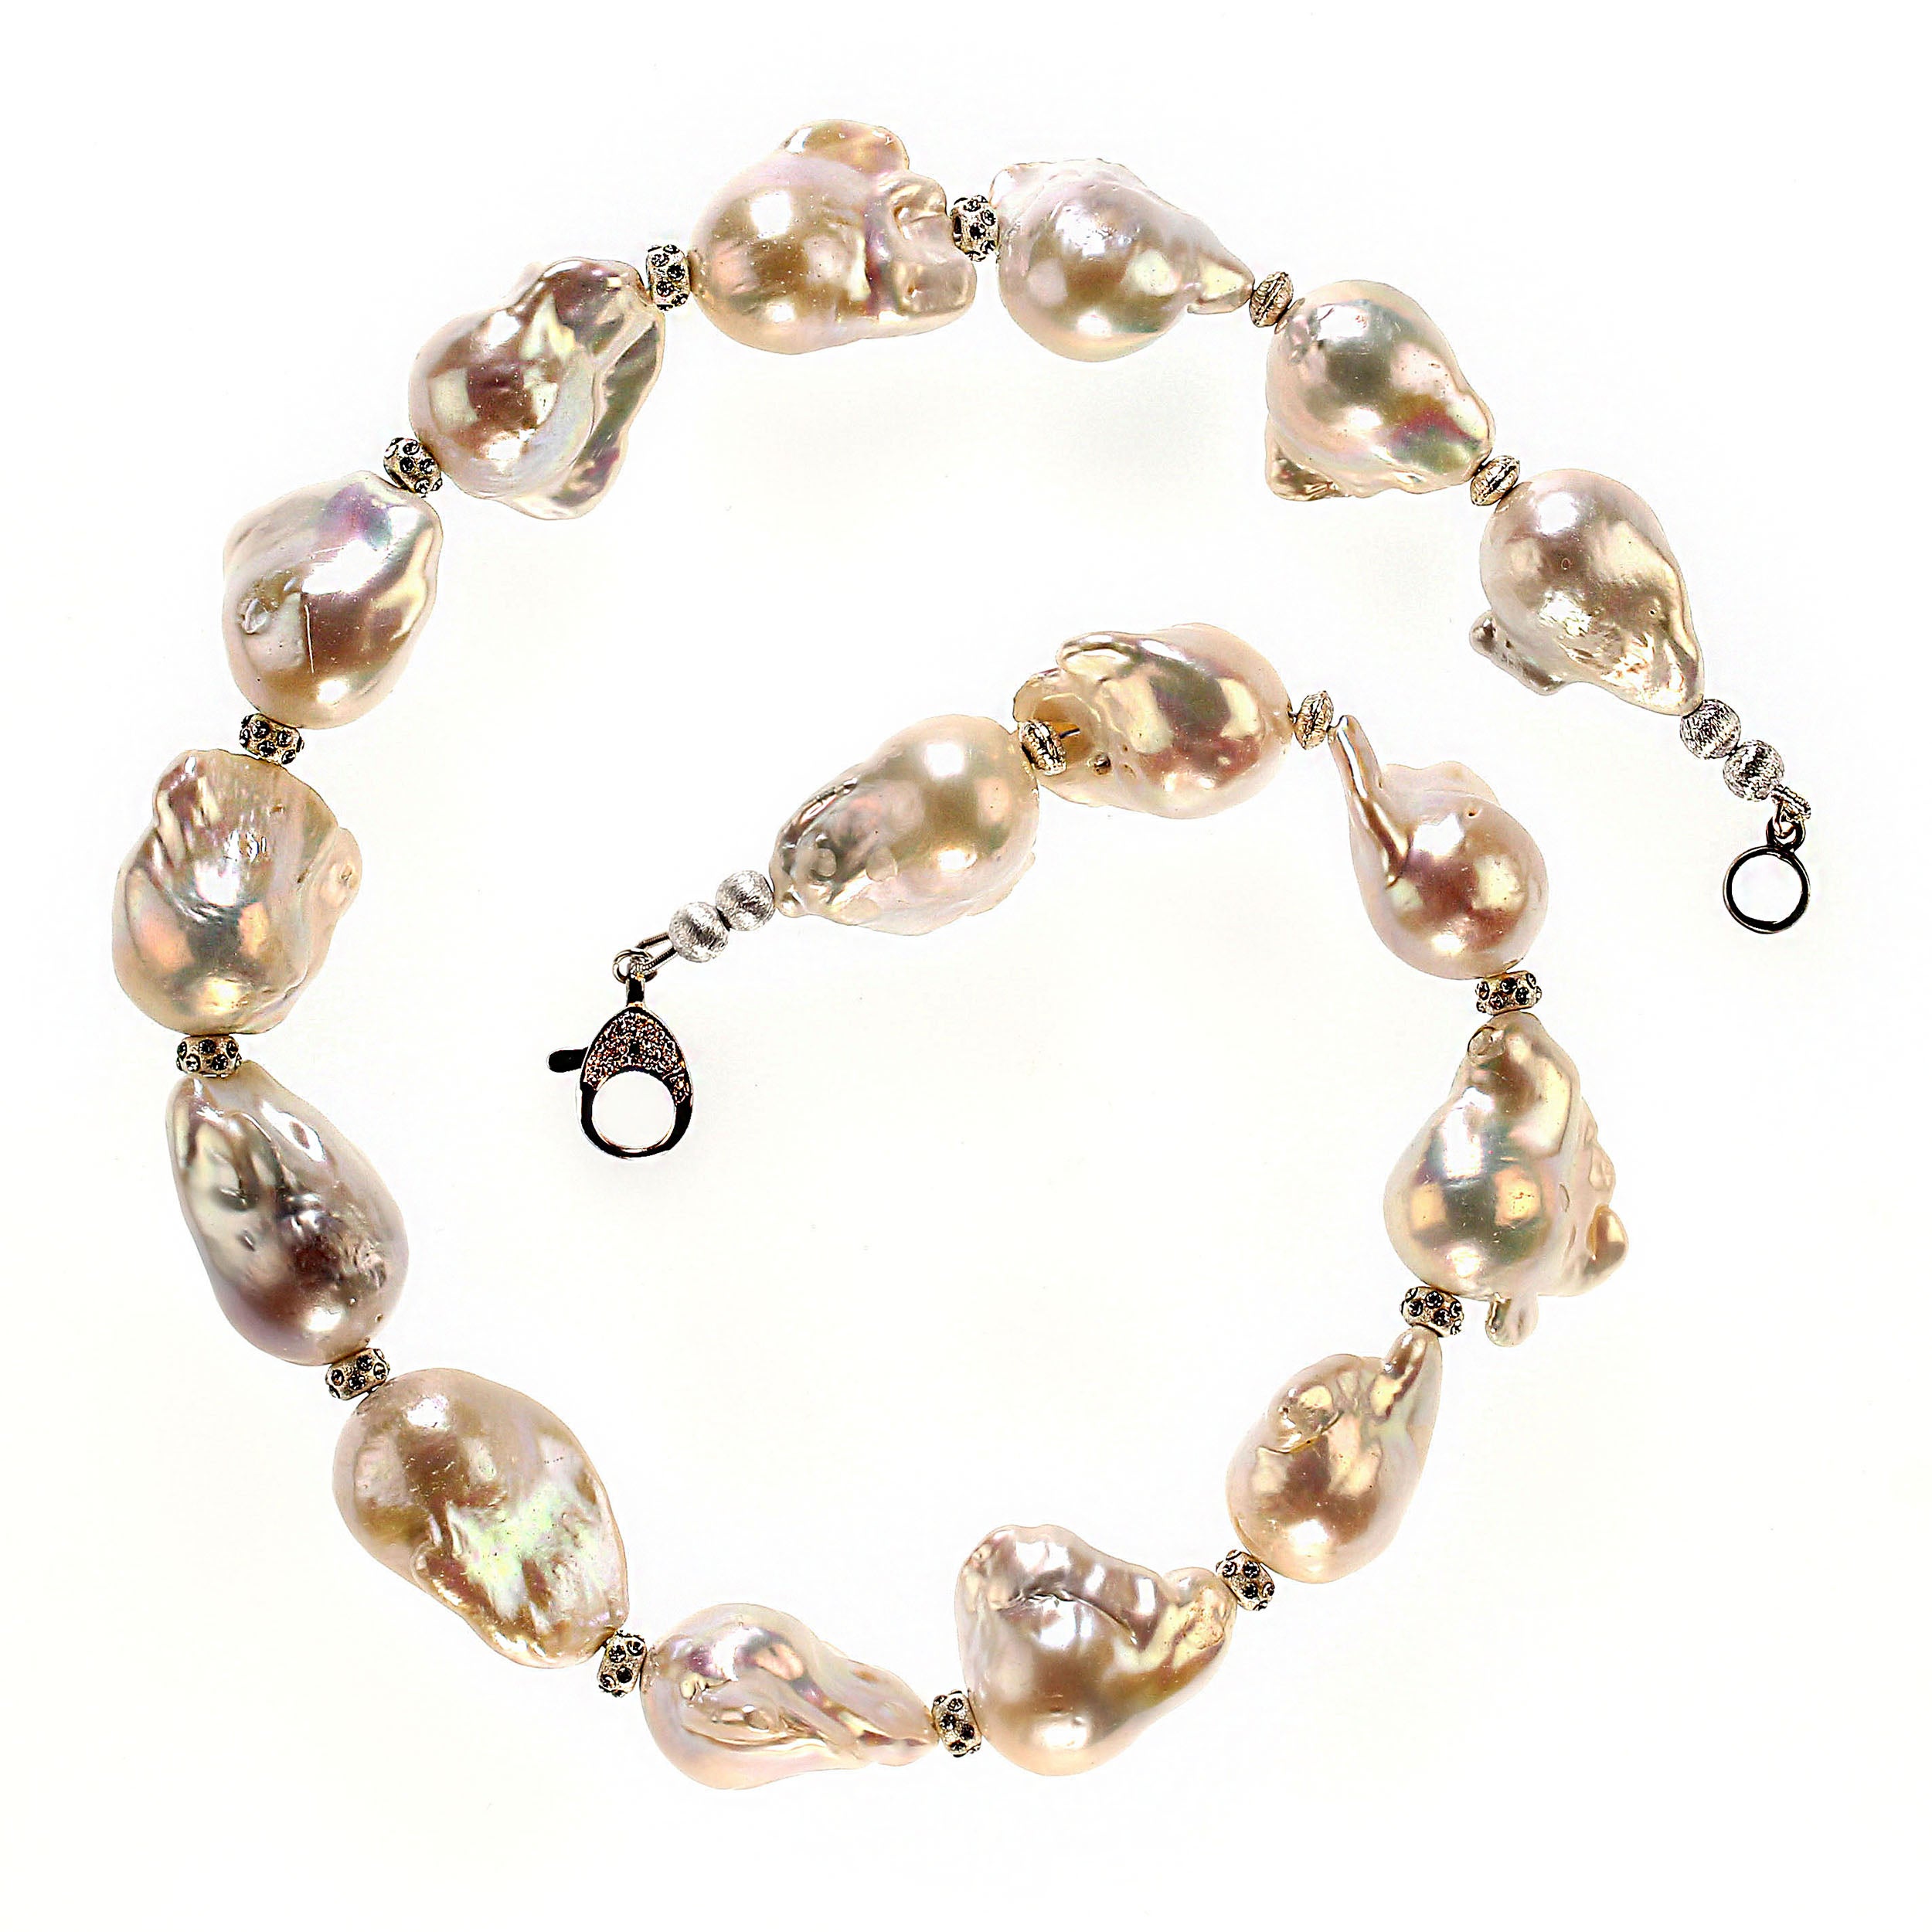 Artisan AJD 19 Inch Giant White Baroque Pearl Necklace with Sparkling Crystal Accents For Sale